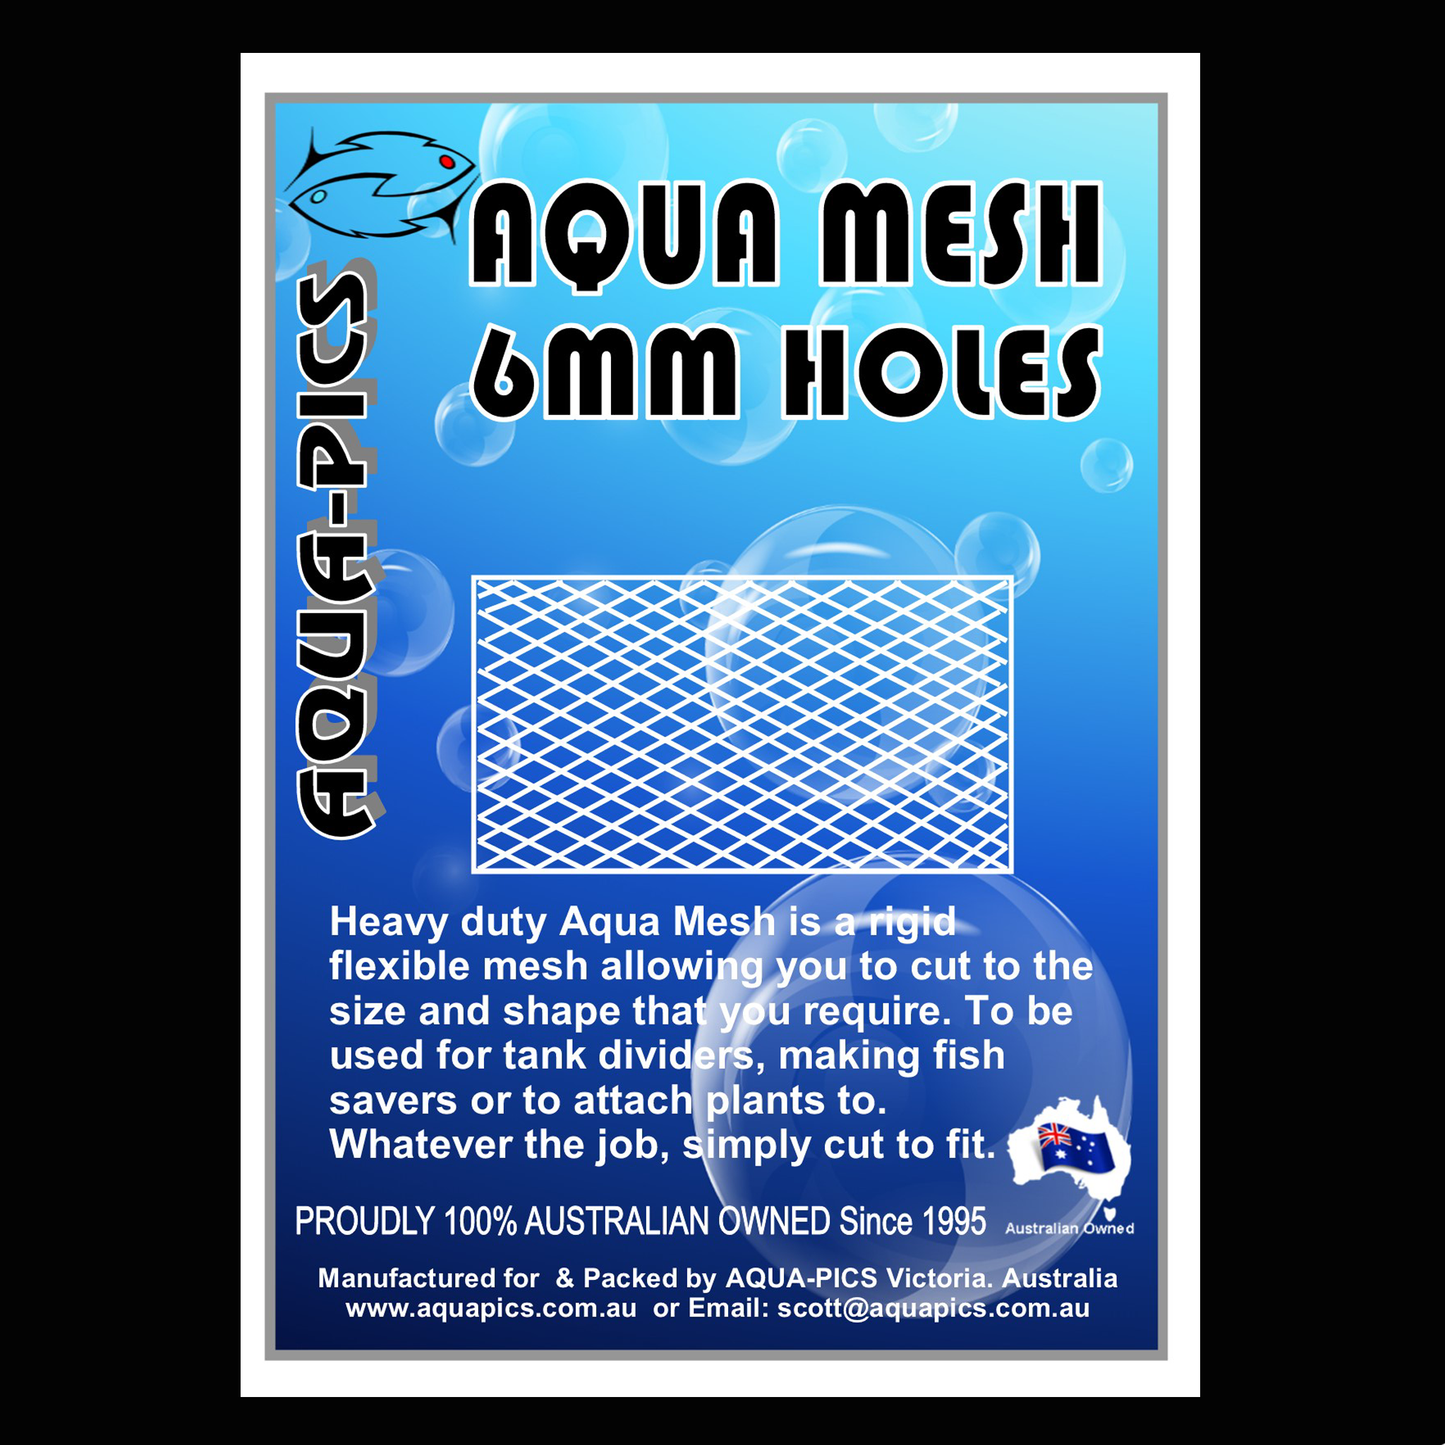 Aqua Mesh 6mm holes For tank dividers & plant supports